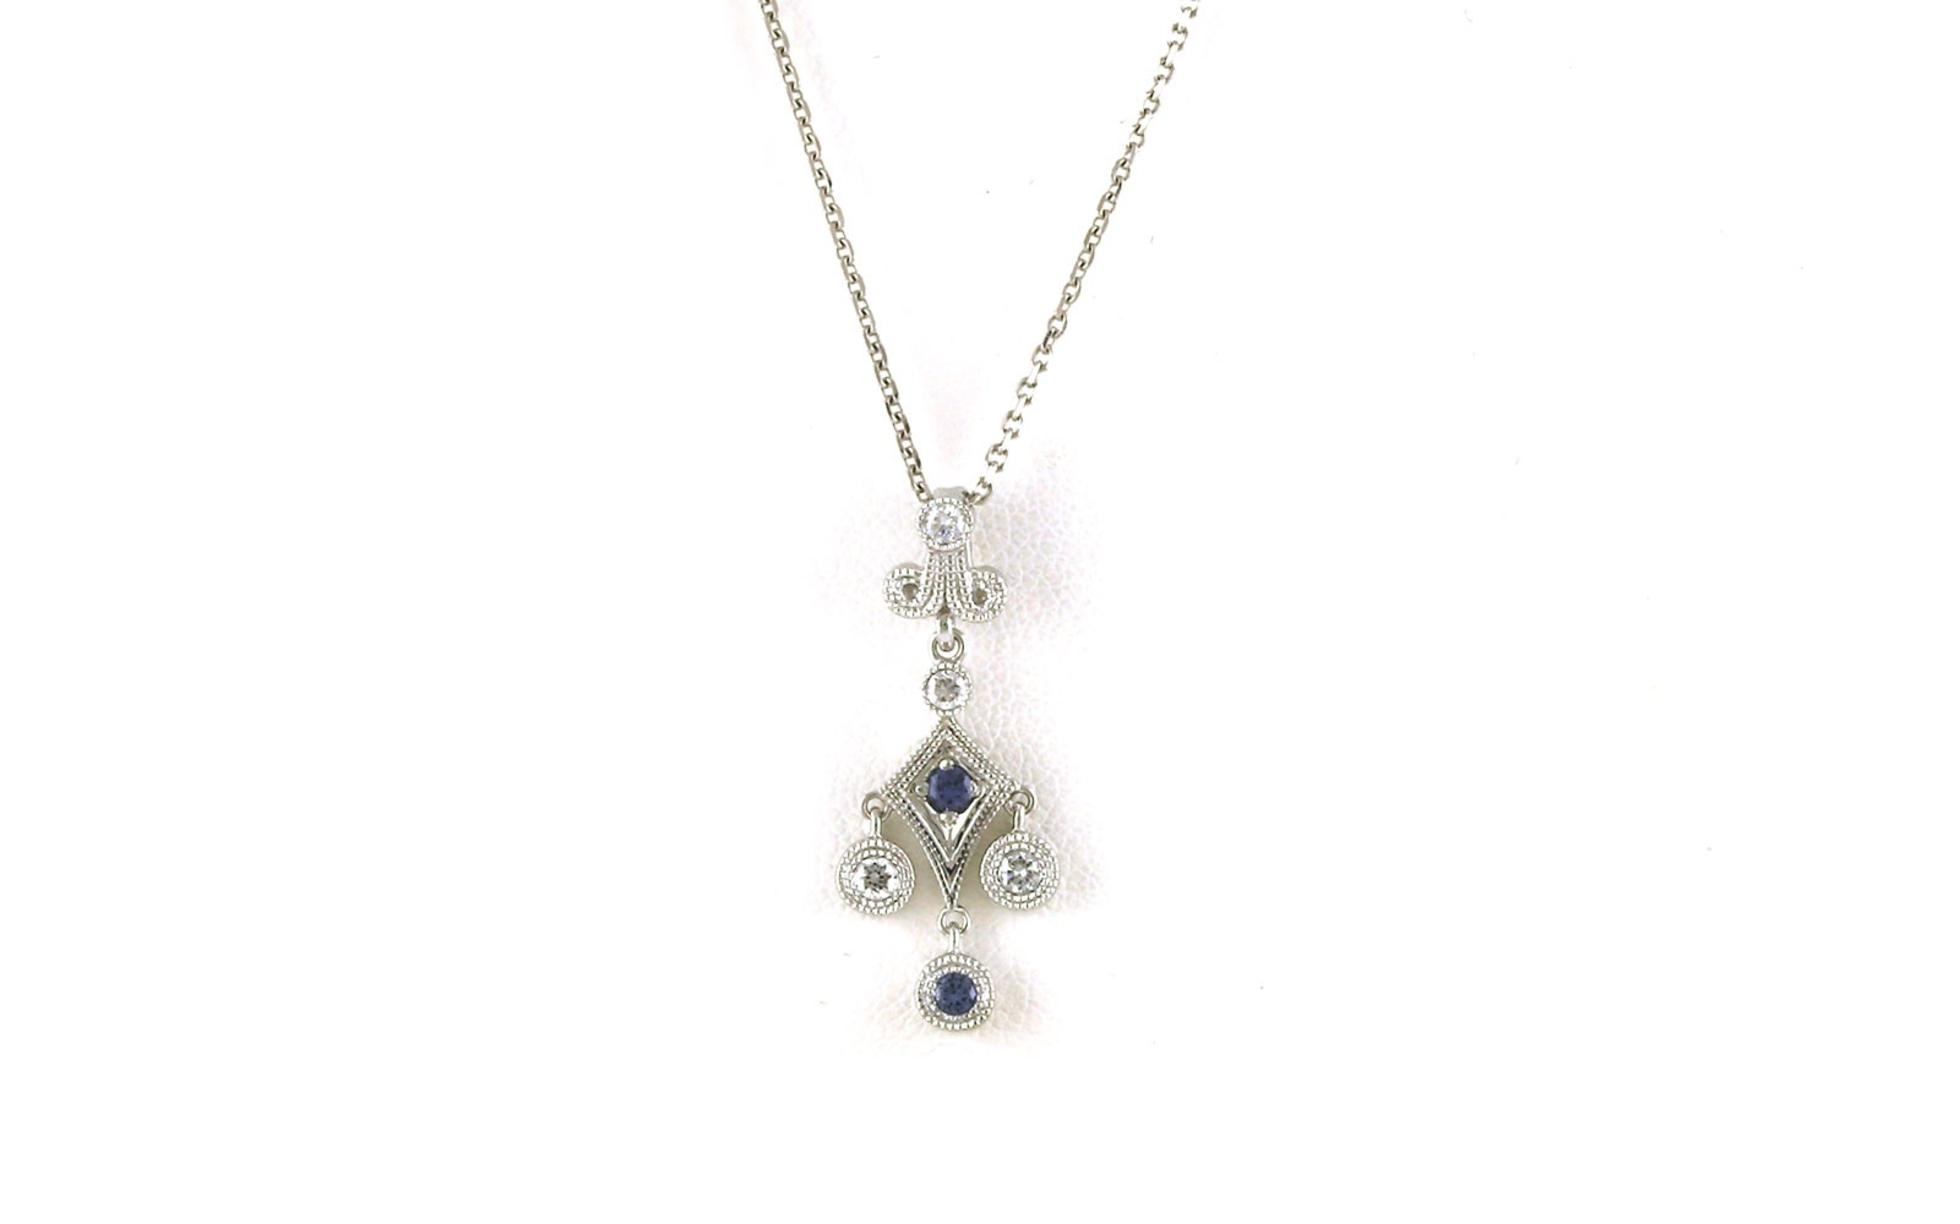 Vintage-style Chandelier Dangle Montana Yogo Sapphire and Diamond Necklace in White Gold (0.14cts TWT)